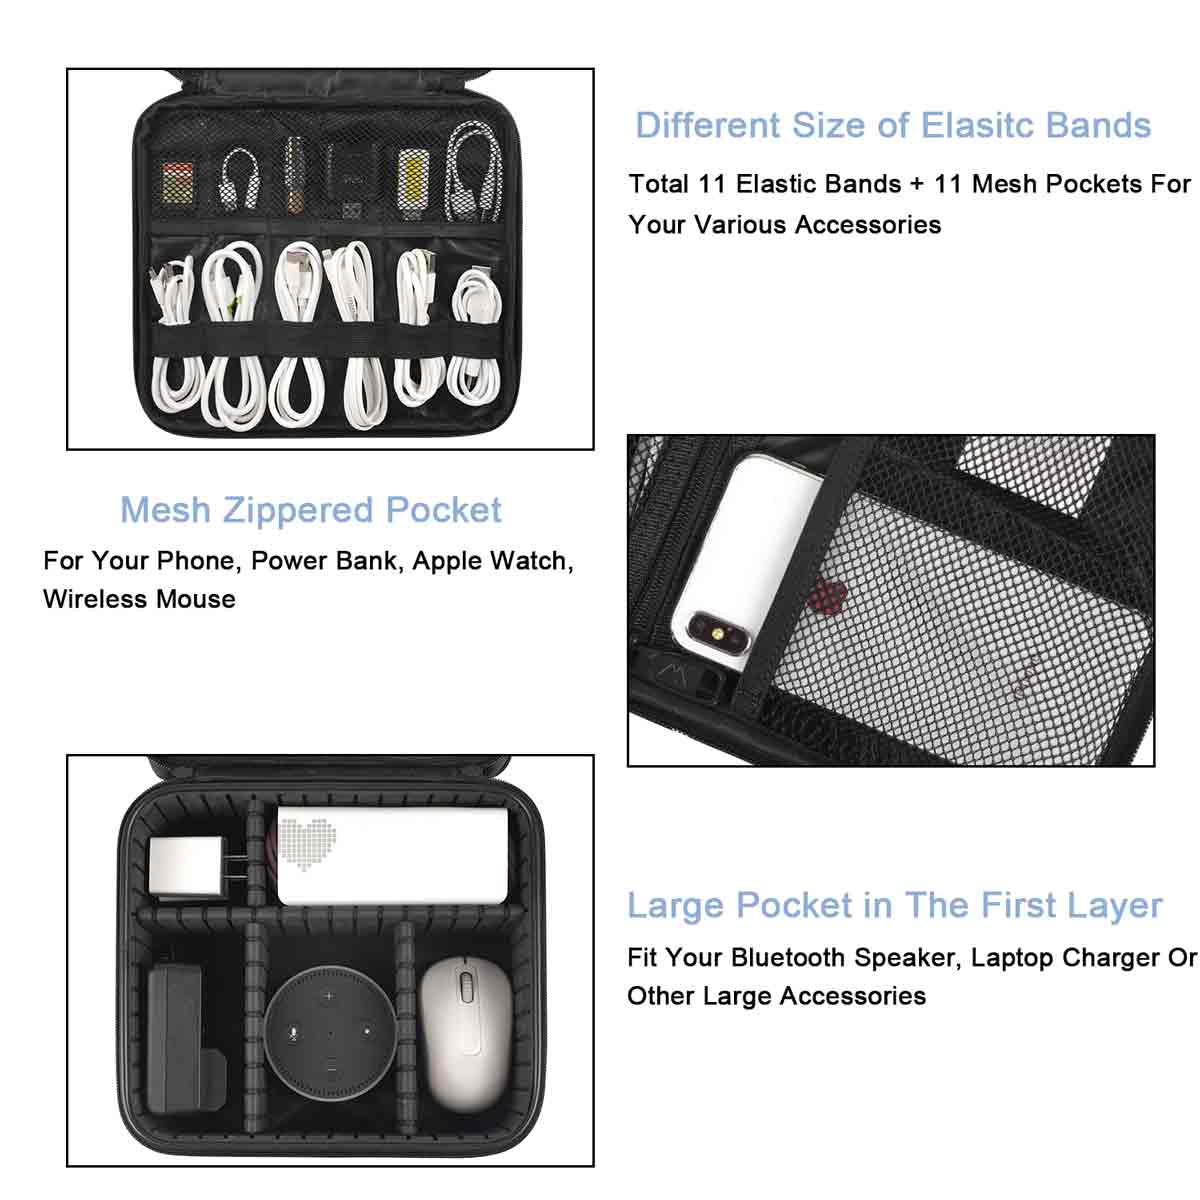 Digital Storage Bag, Power Bank, Mouse, Charger, Data Cable